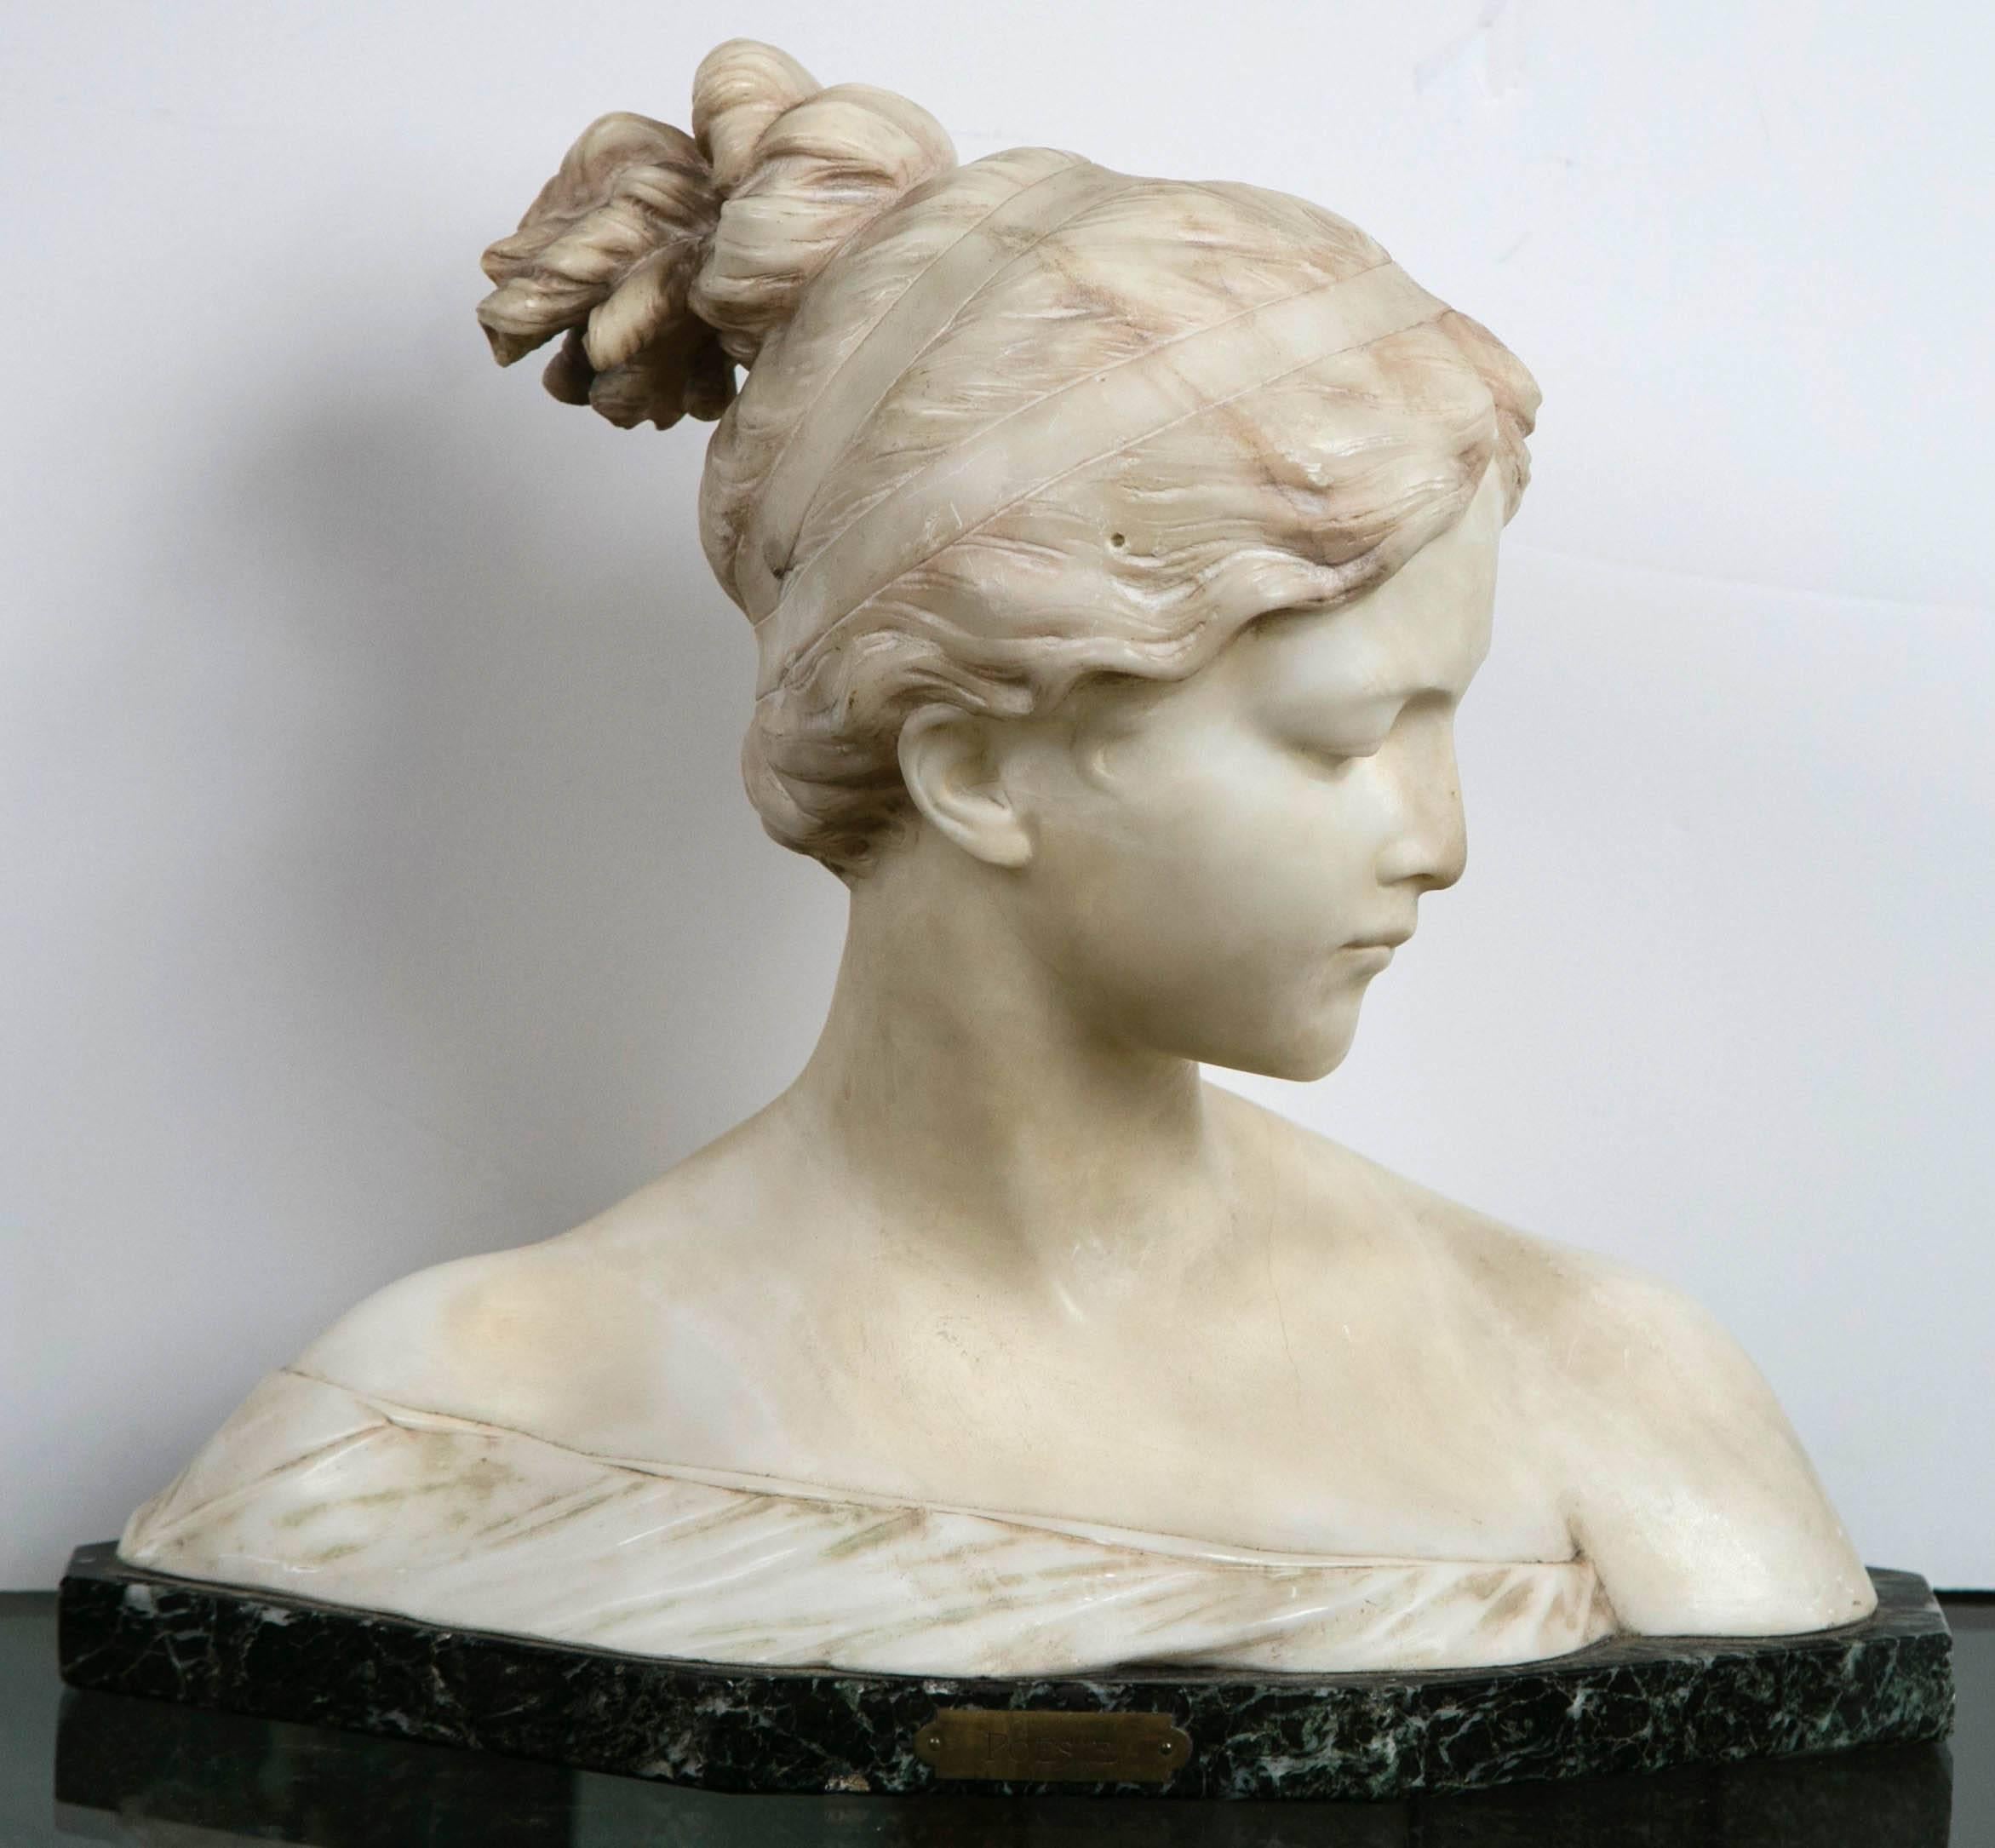 This marble bust of a lovely young female has a incised signature on back of the left shoulder. It appears to read Prof. Ganelli with an illegible location below it.

Her hair tied up atop her head in masterful marble carving. The slight look of a